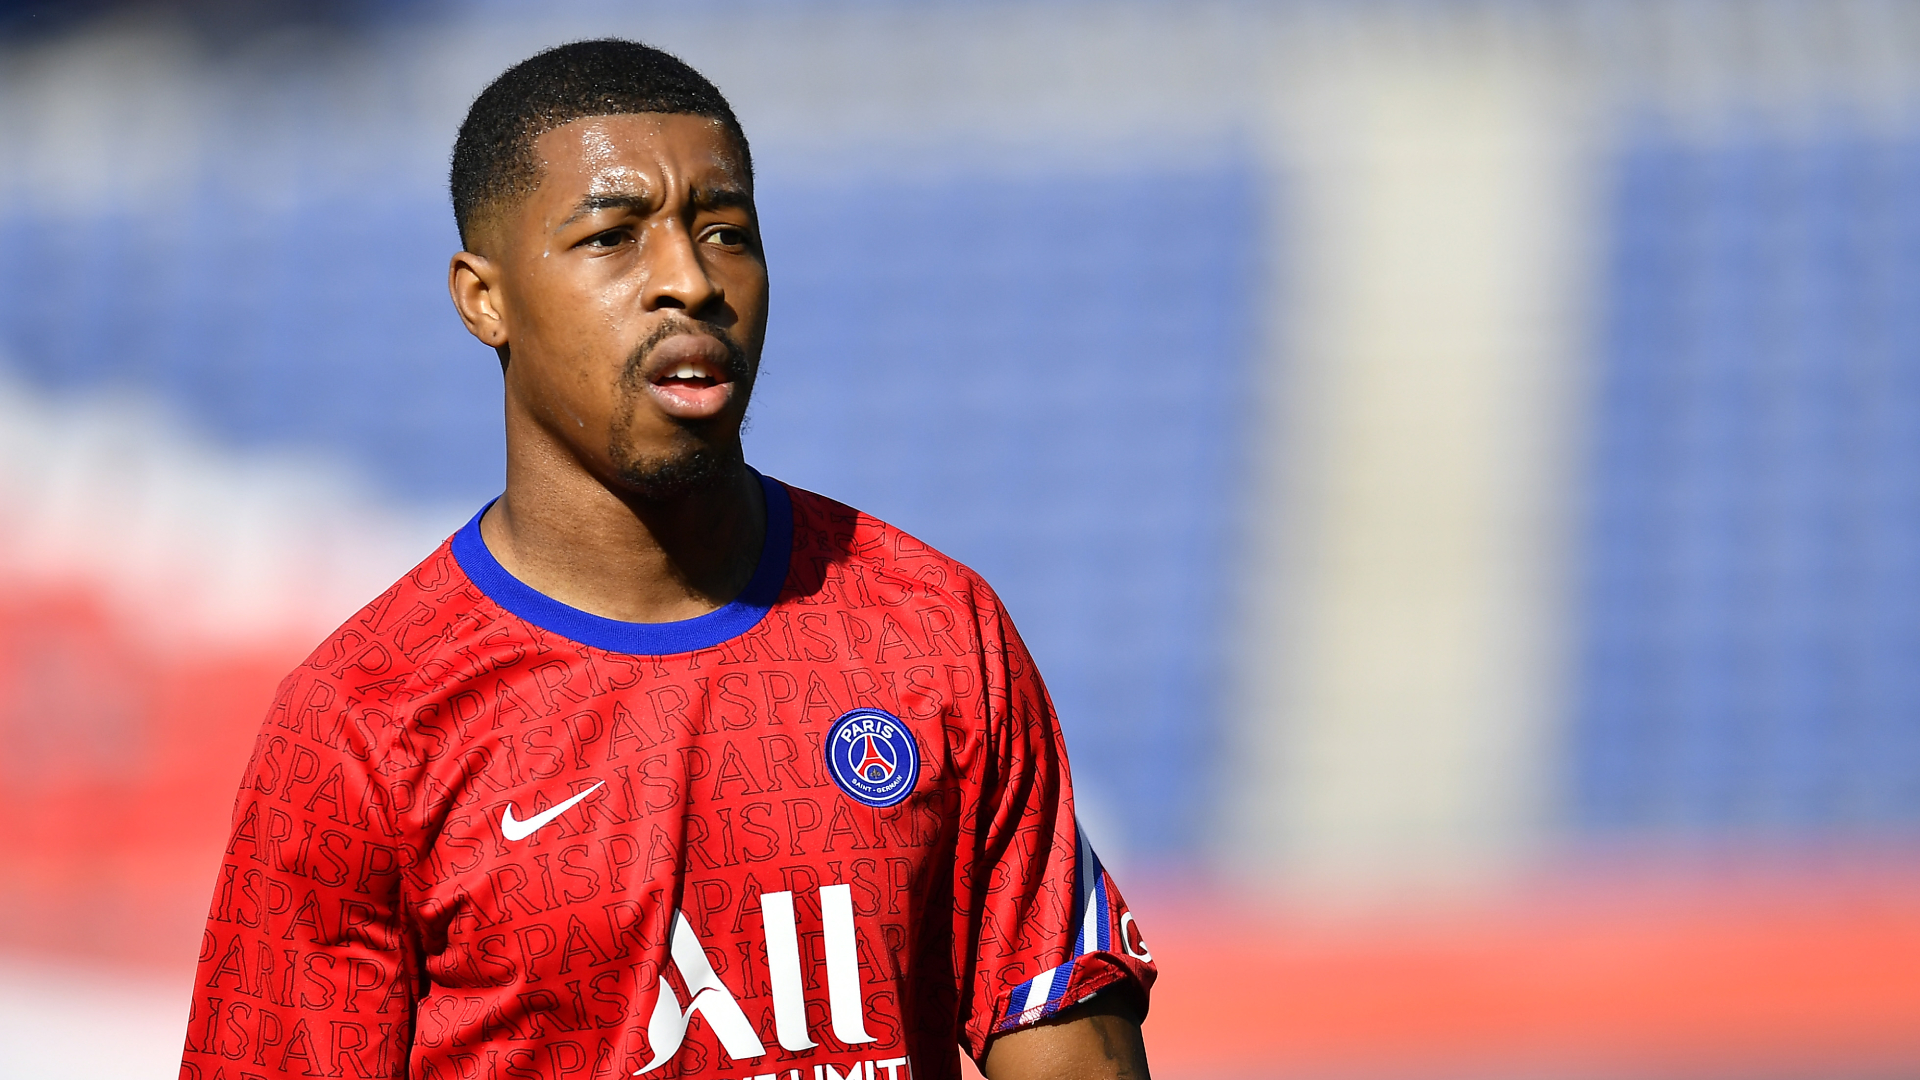 Kimpembe Is Awaiting Return Of Fans For This Season